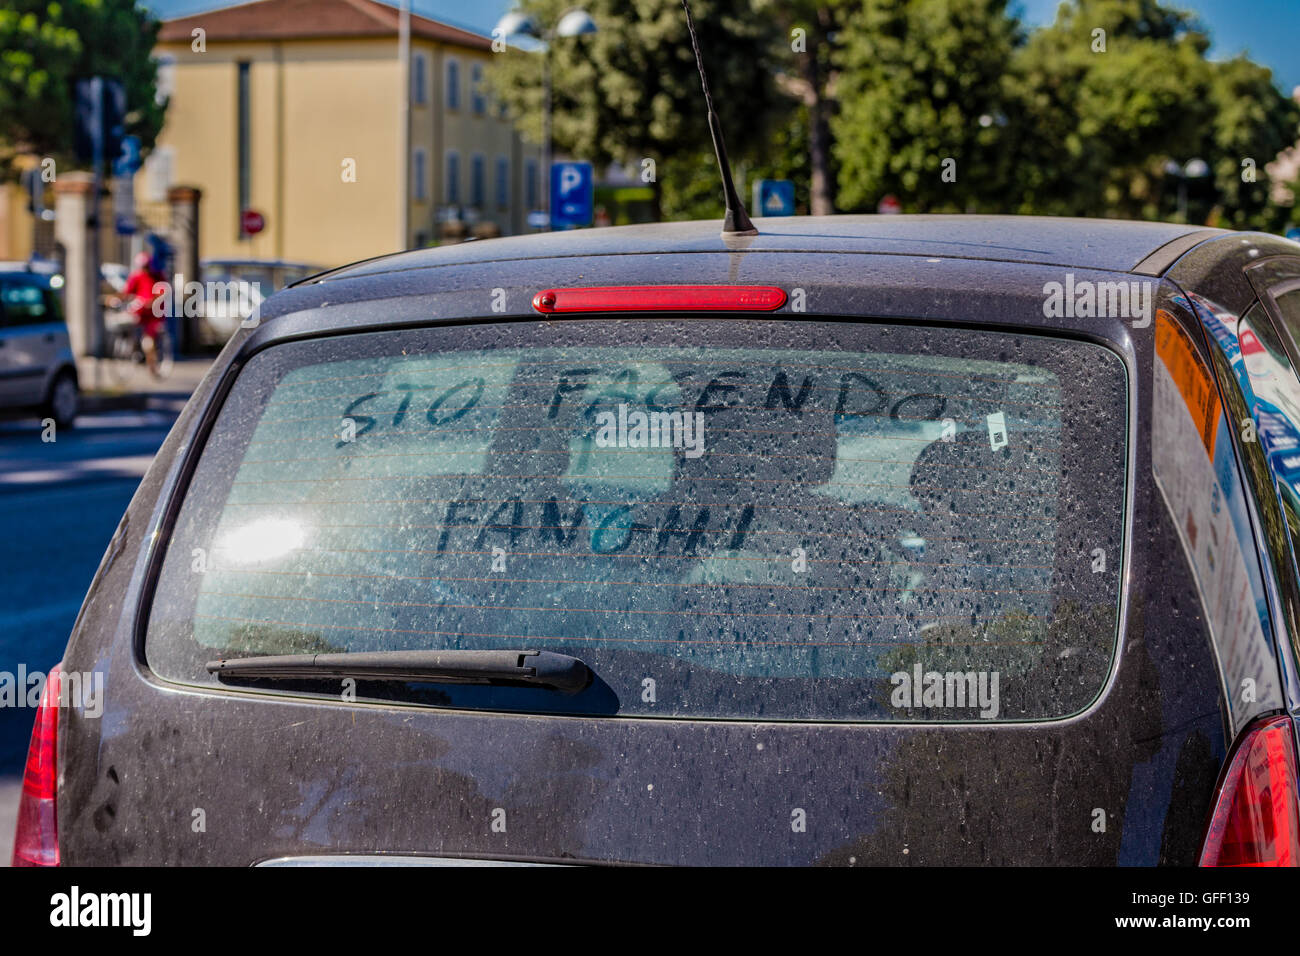 Italian sentence written for the purpose mocking on the heated rear window of a car dirty meaning I am taking mud bath Stock Photo